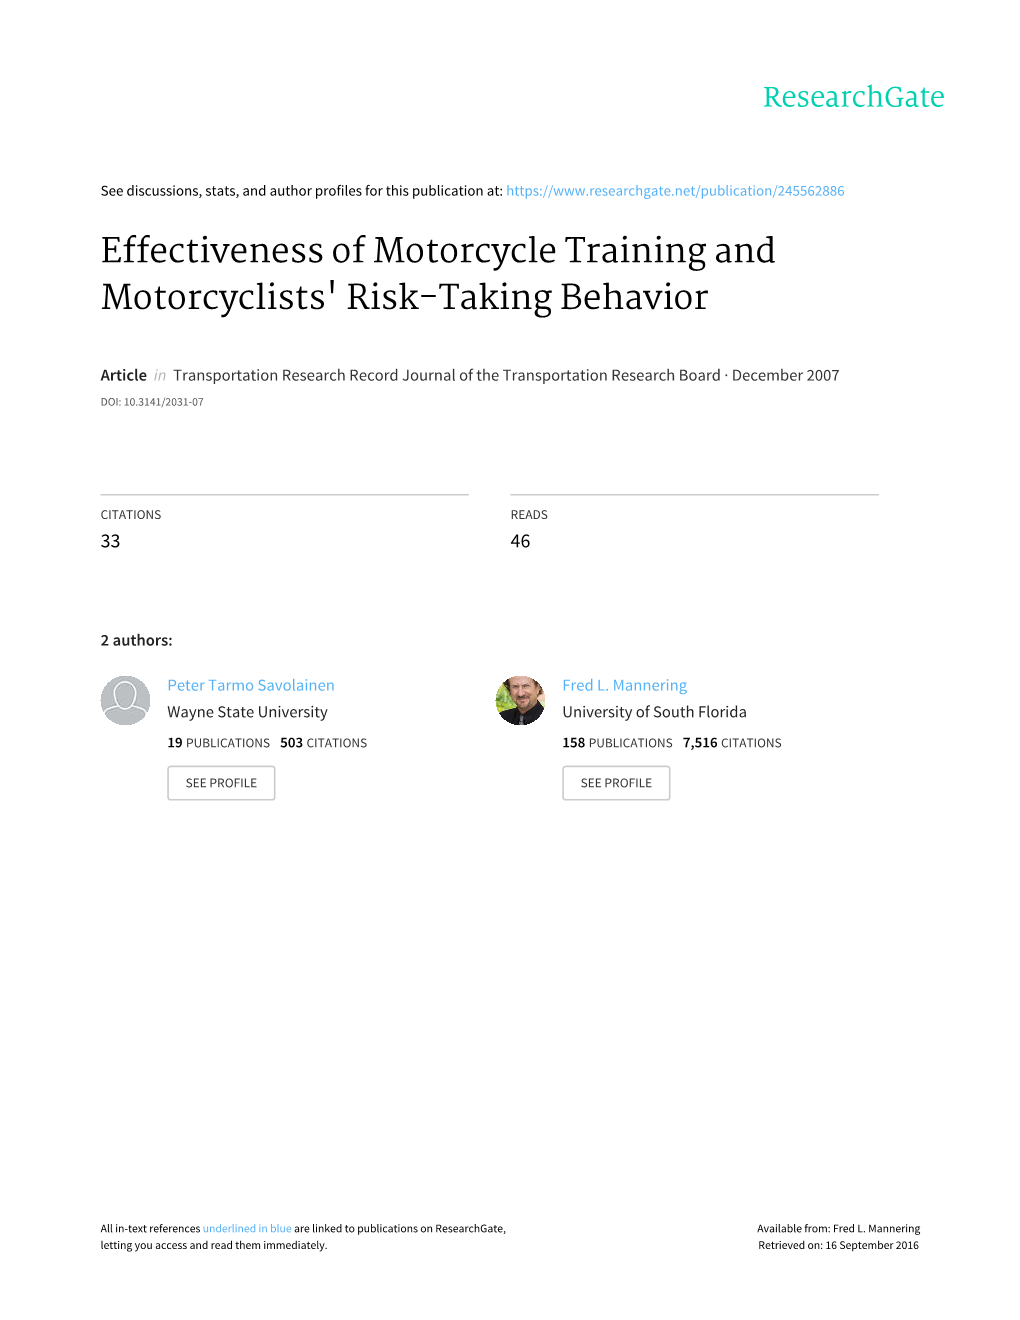 Effectiveness of Motorcycle Training and Motorcyclists' Risk-Taking Behavior